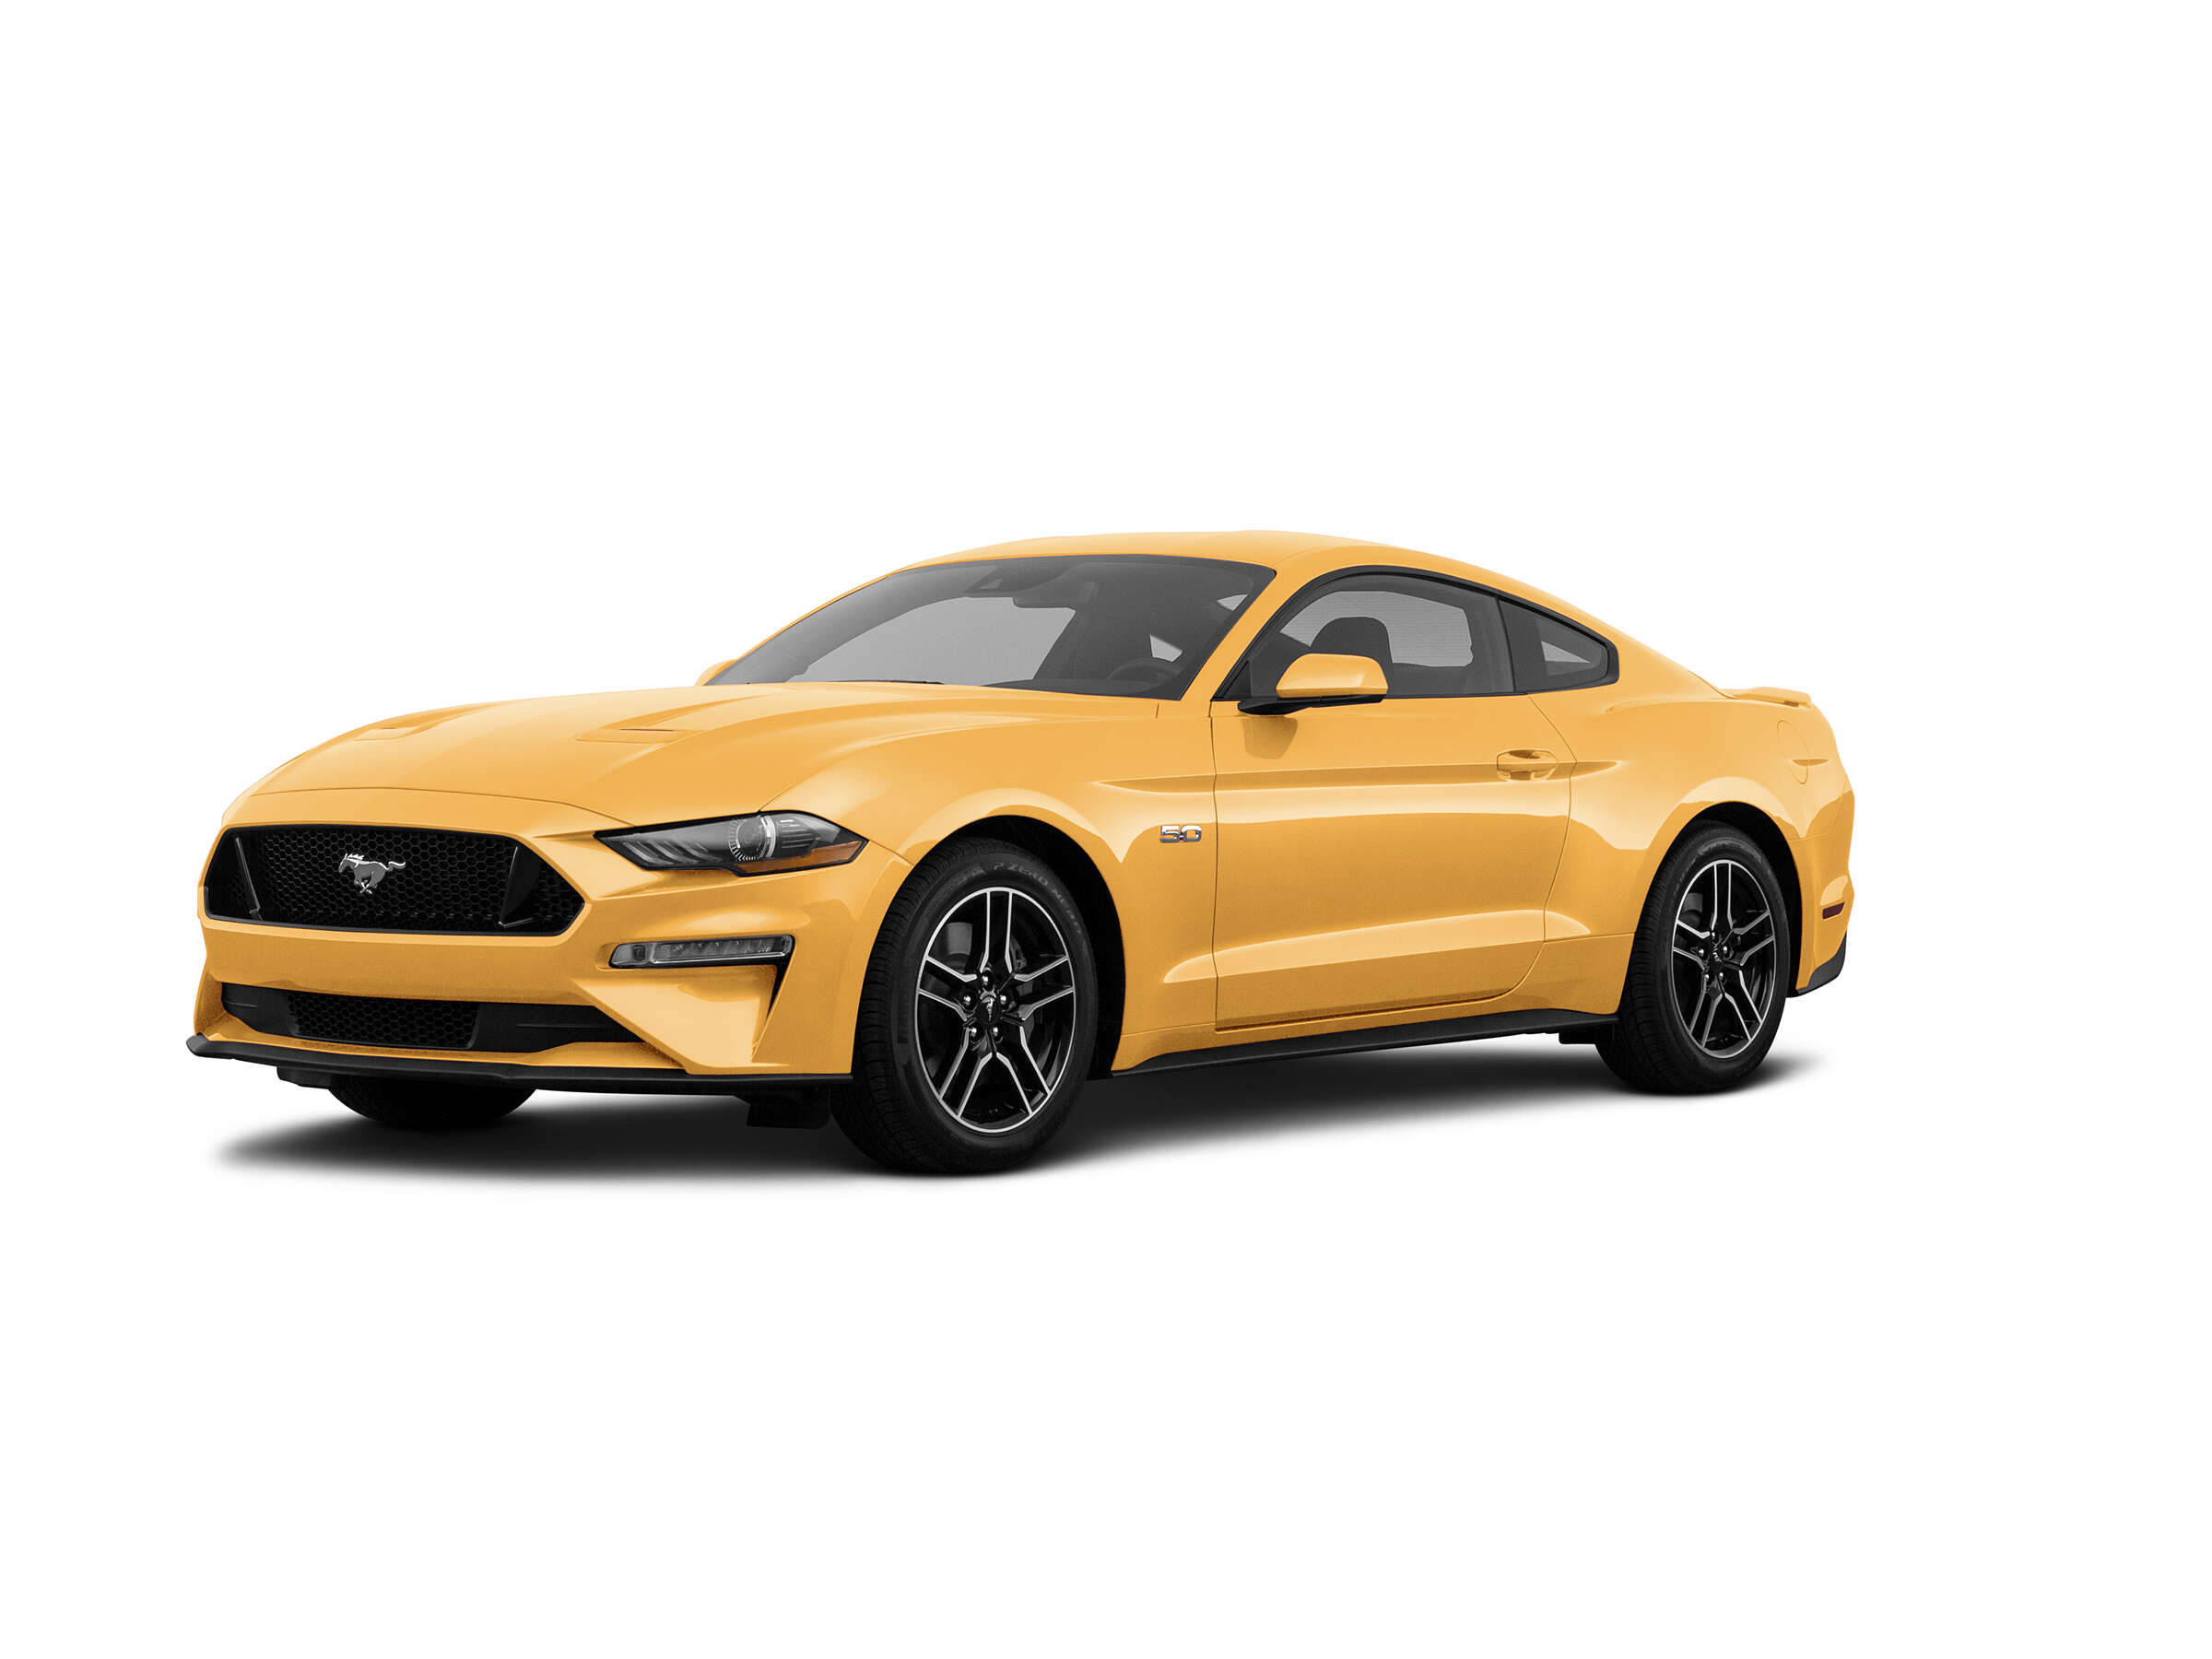 Ford Mustang for sale in Franklin, Tennessee